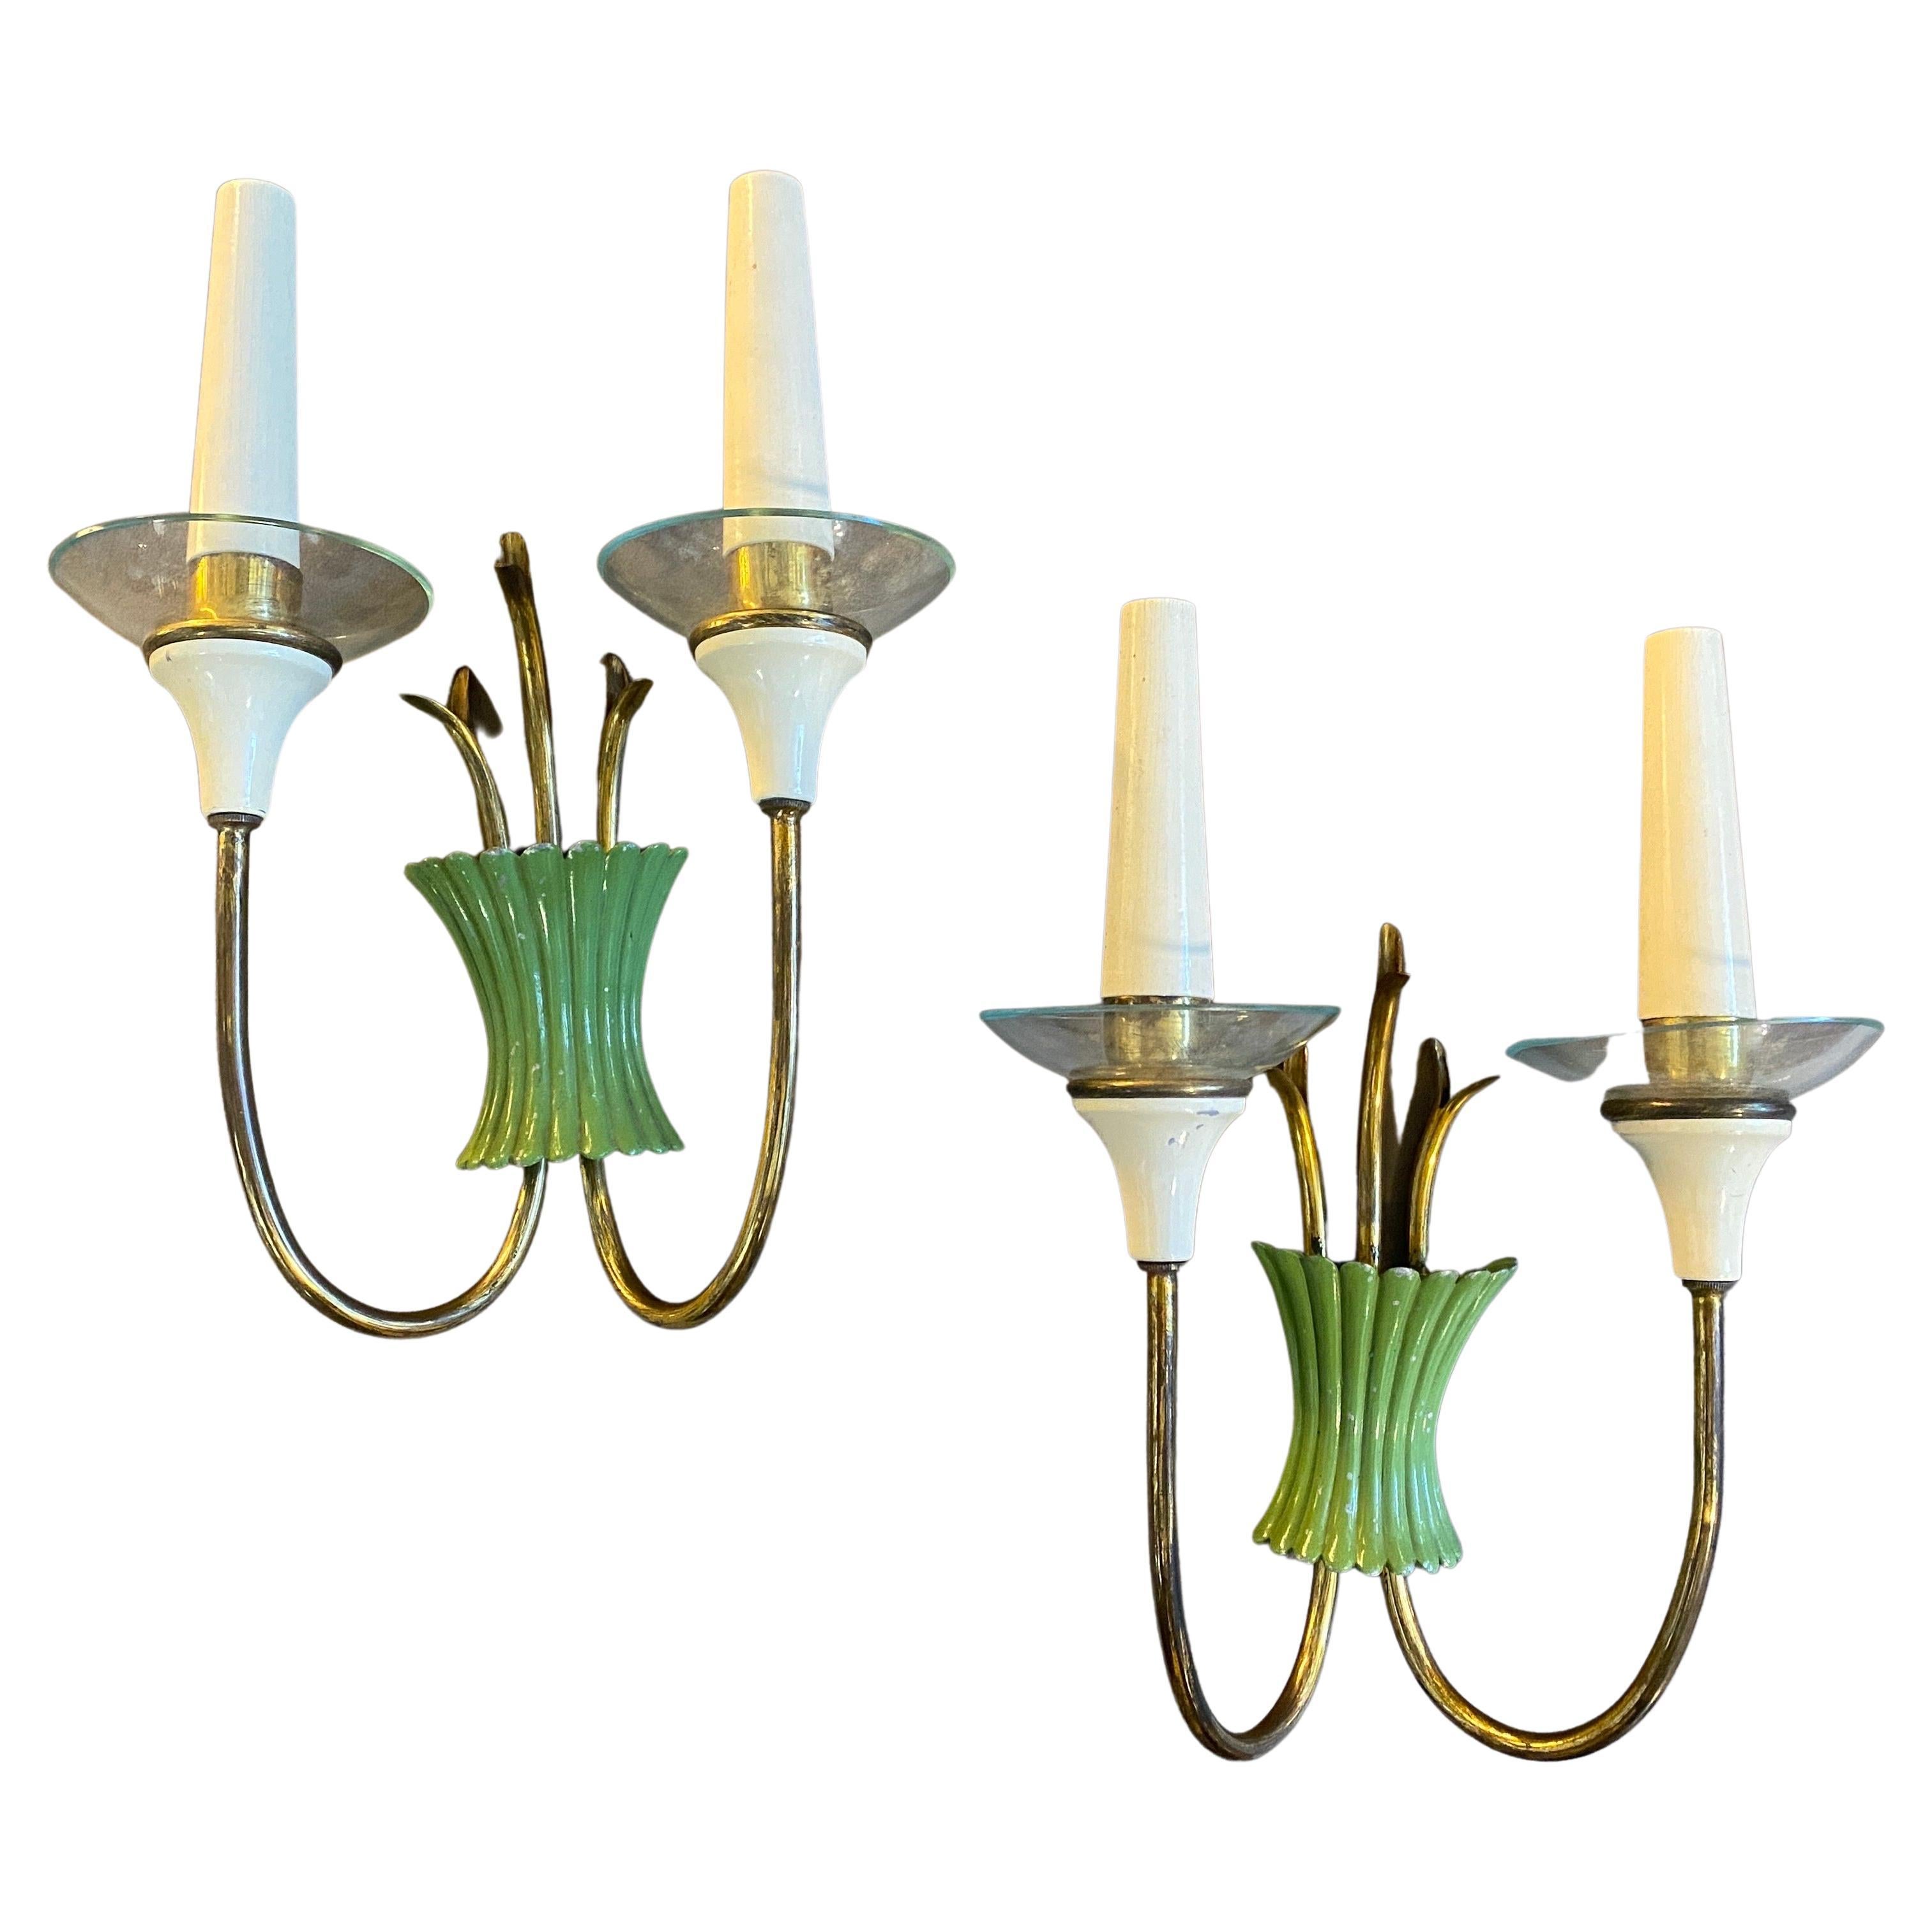 Two 1950s Mid-Century Modern Brass, Green Metal and Glass Italian Wall Sconces For Sale